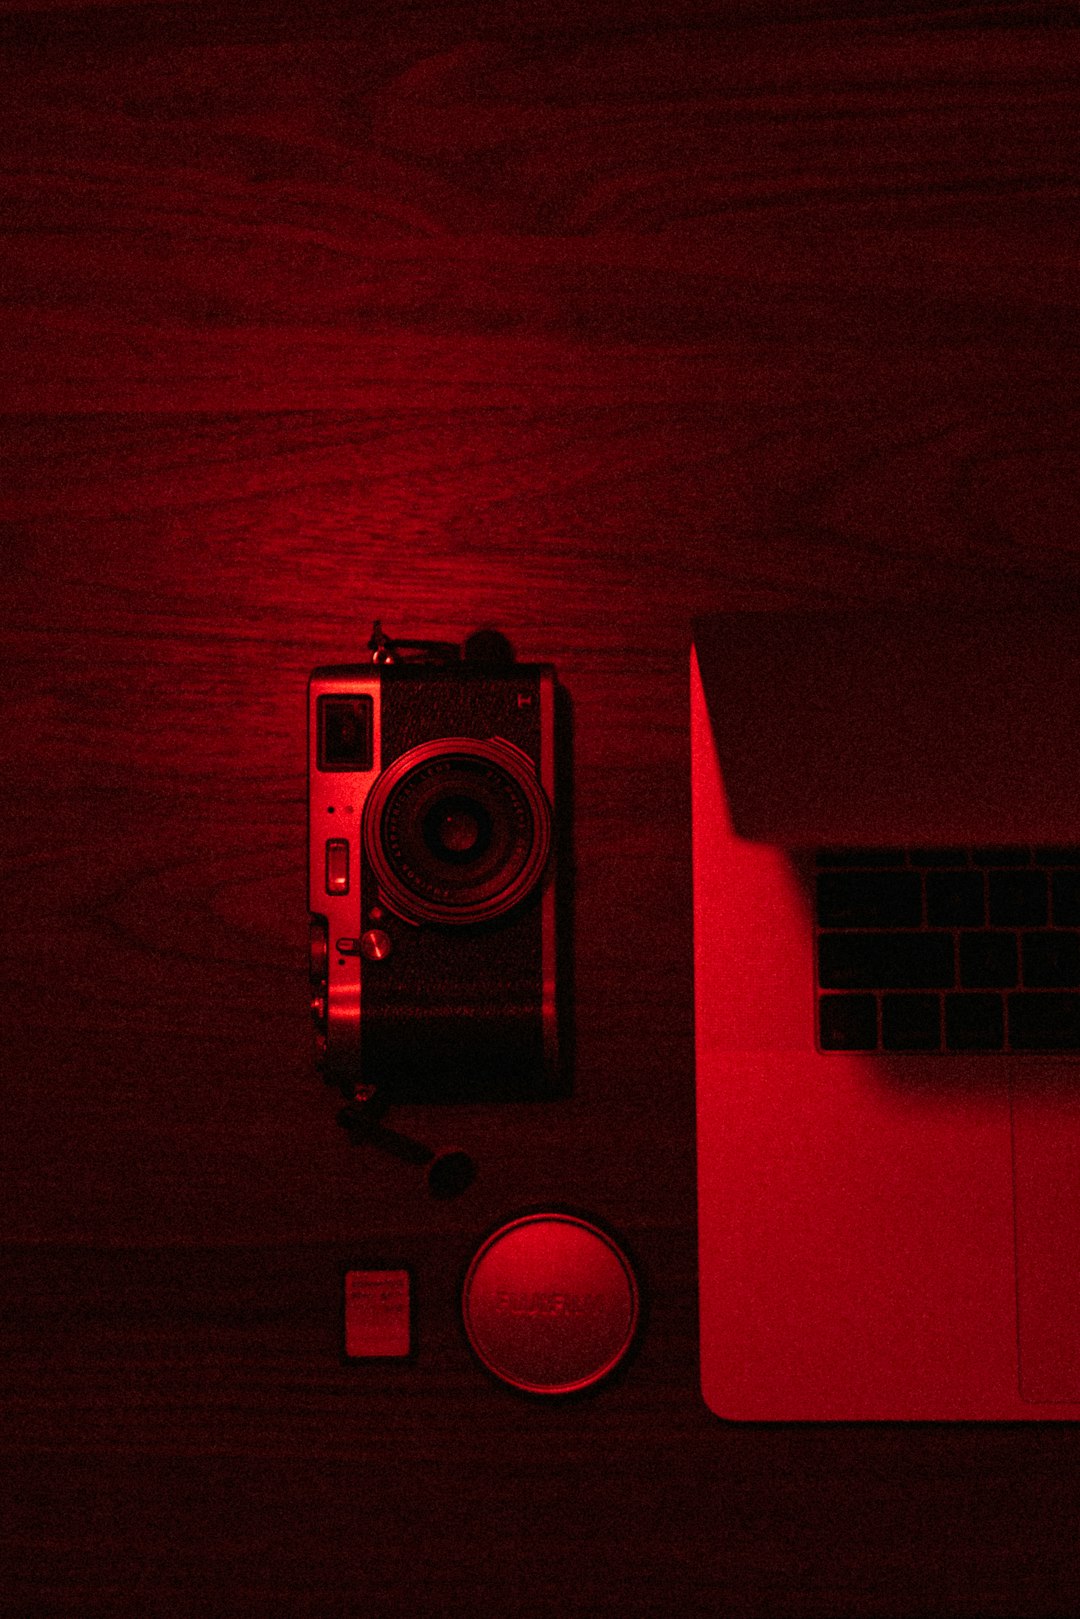 red and black camera on red surface